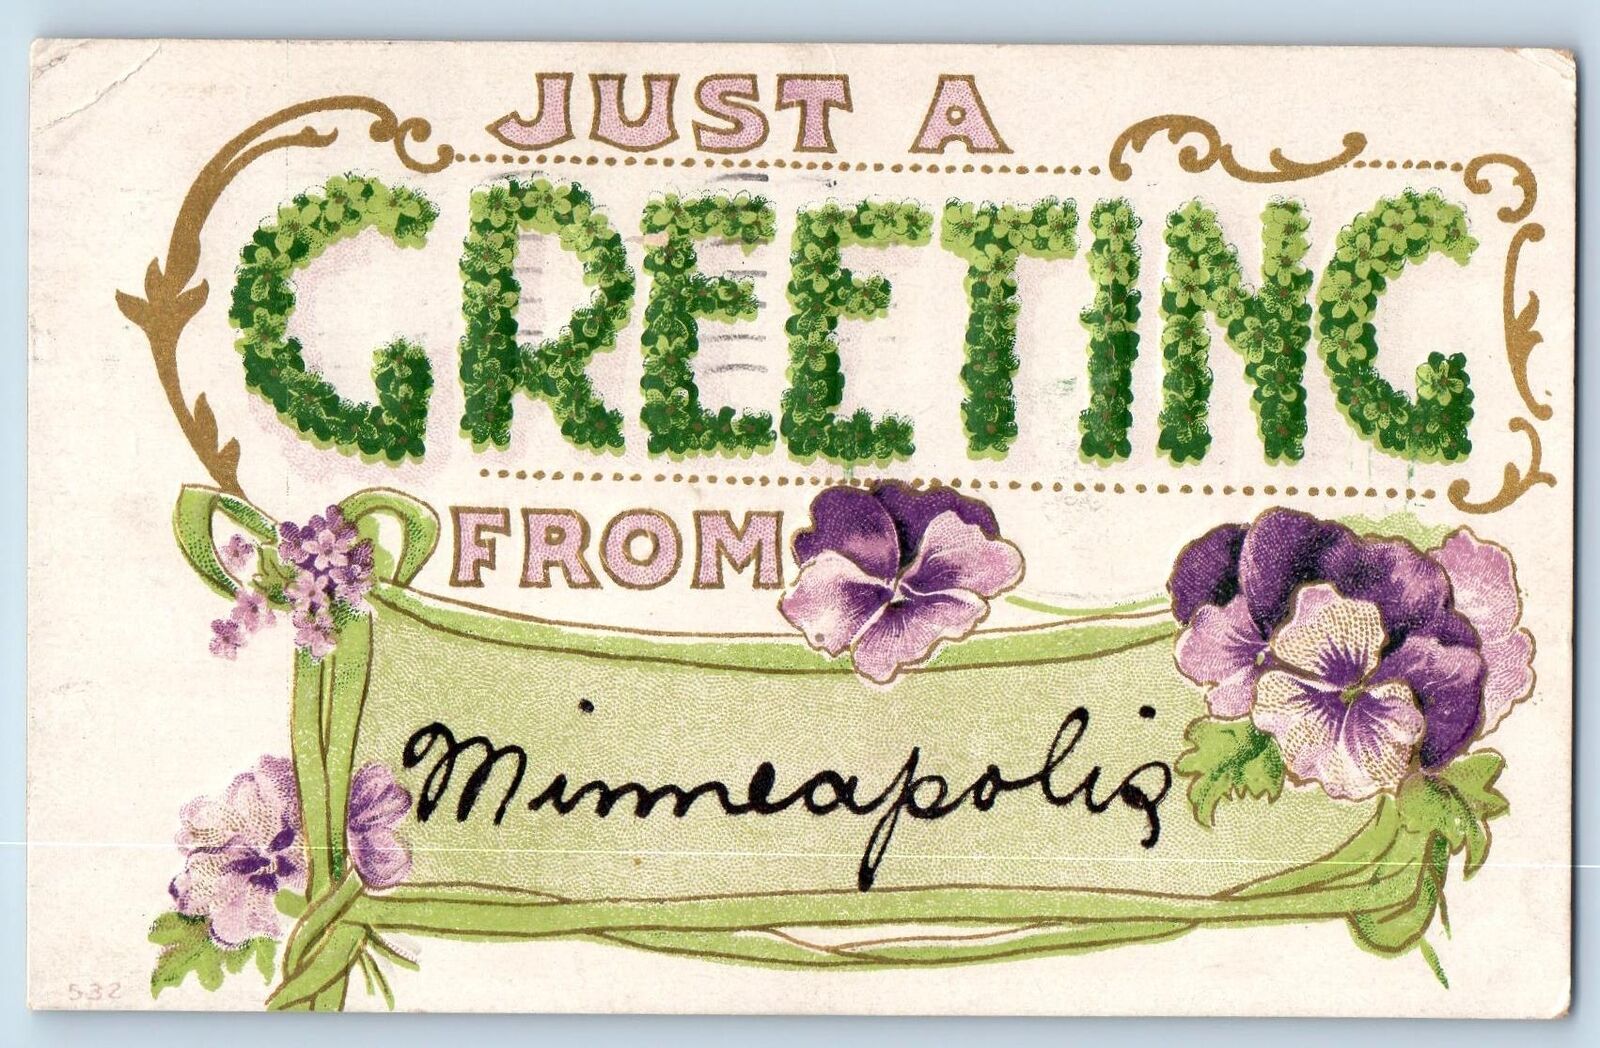 Minneapolis Minnesota Postcard Just A Greeting Flowers And Leaves 1910 Antique